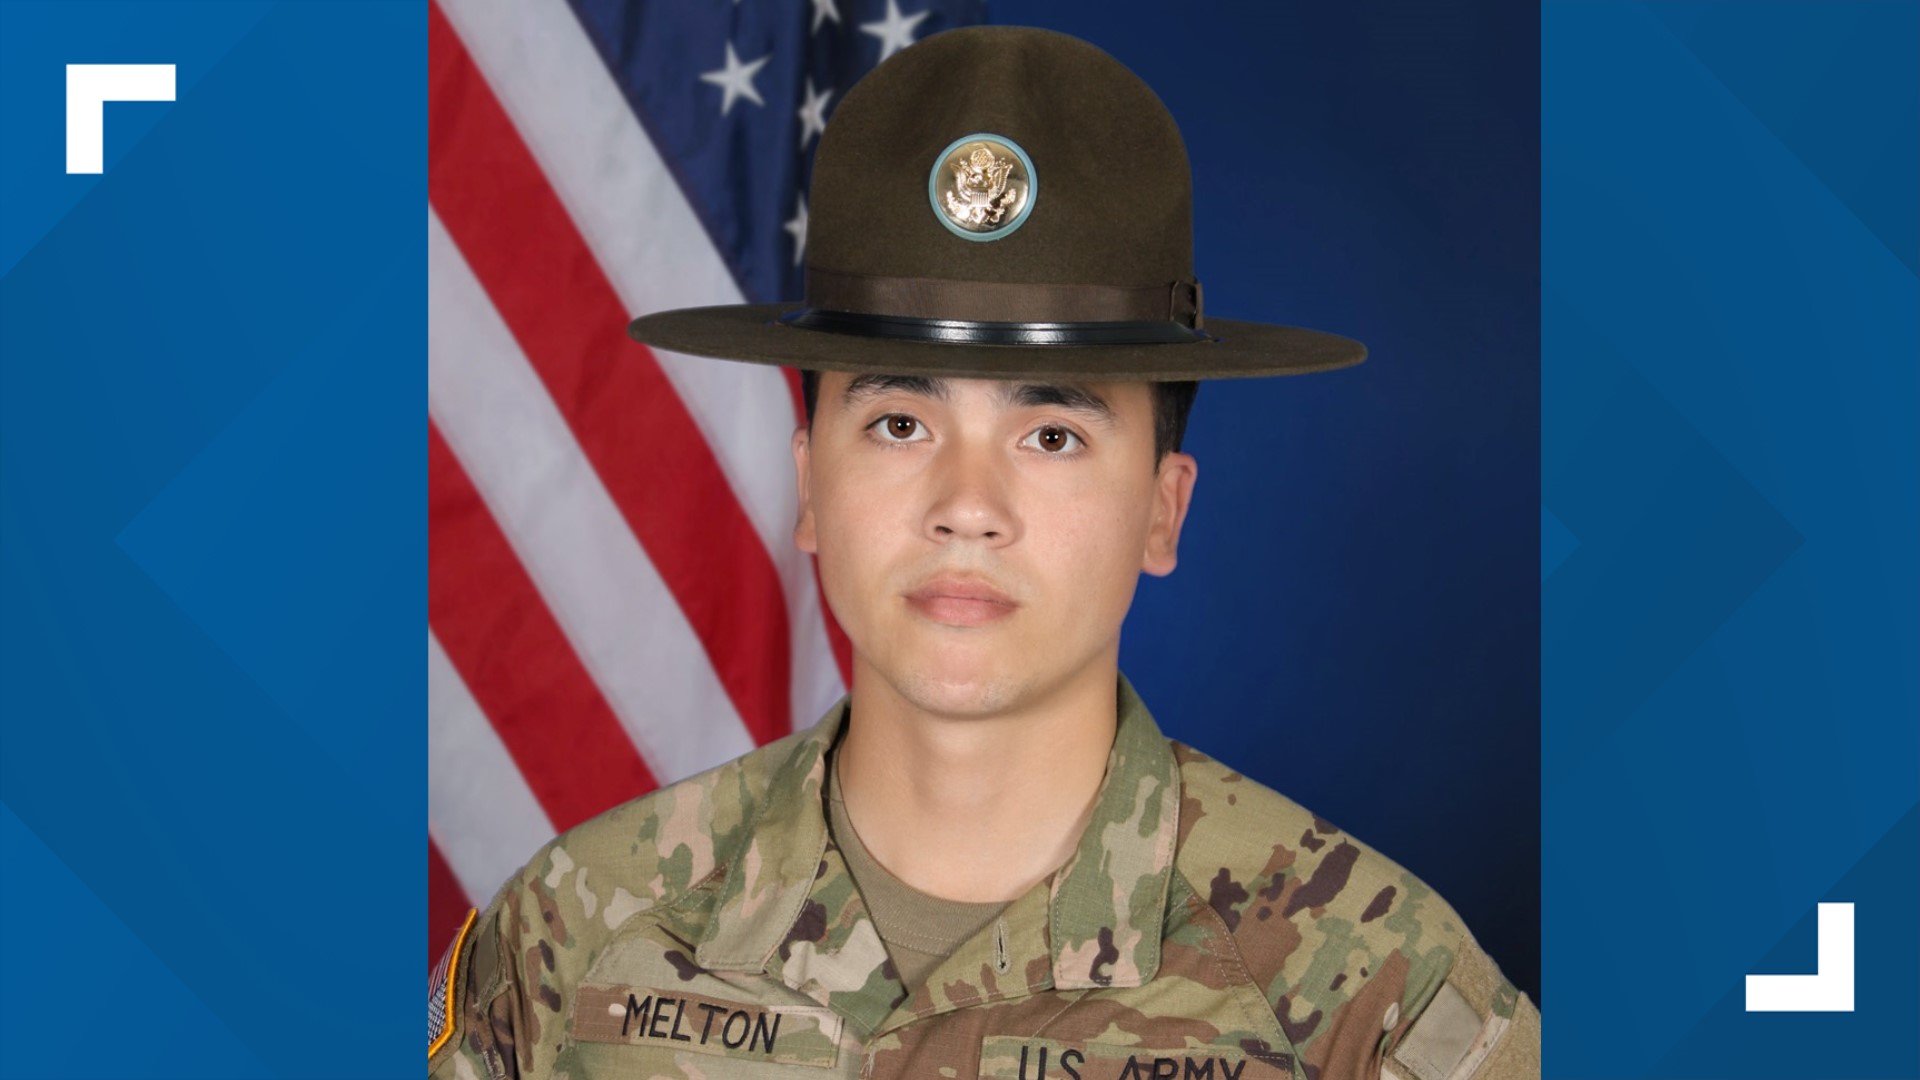 Now two death investigations are underway, as this is the second drill instructor who have died on base this year.